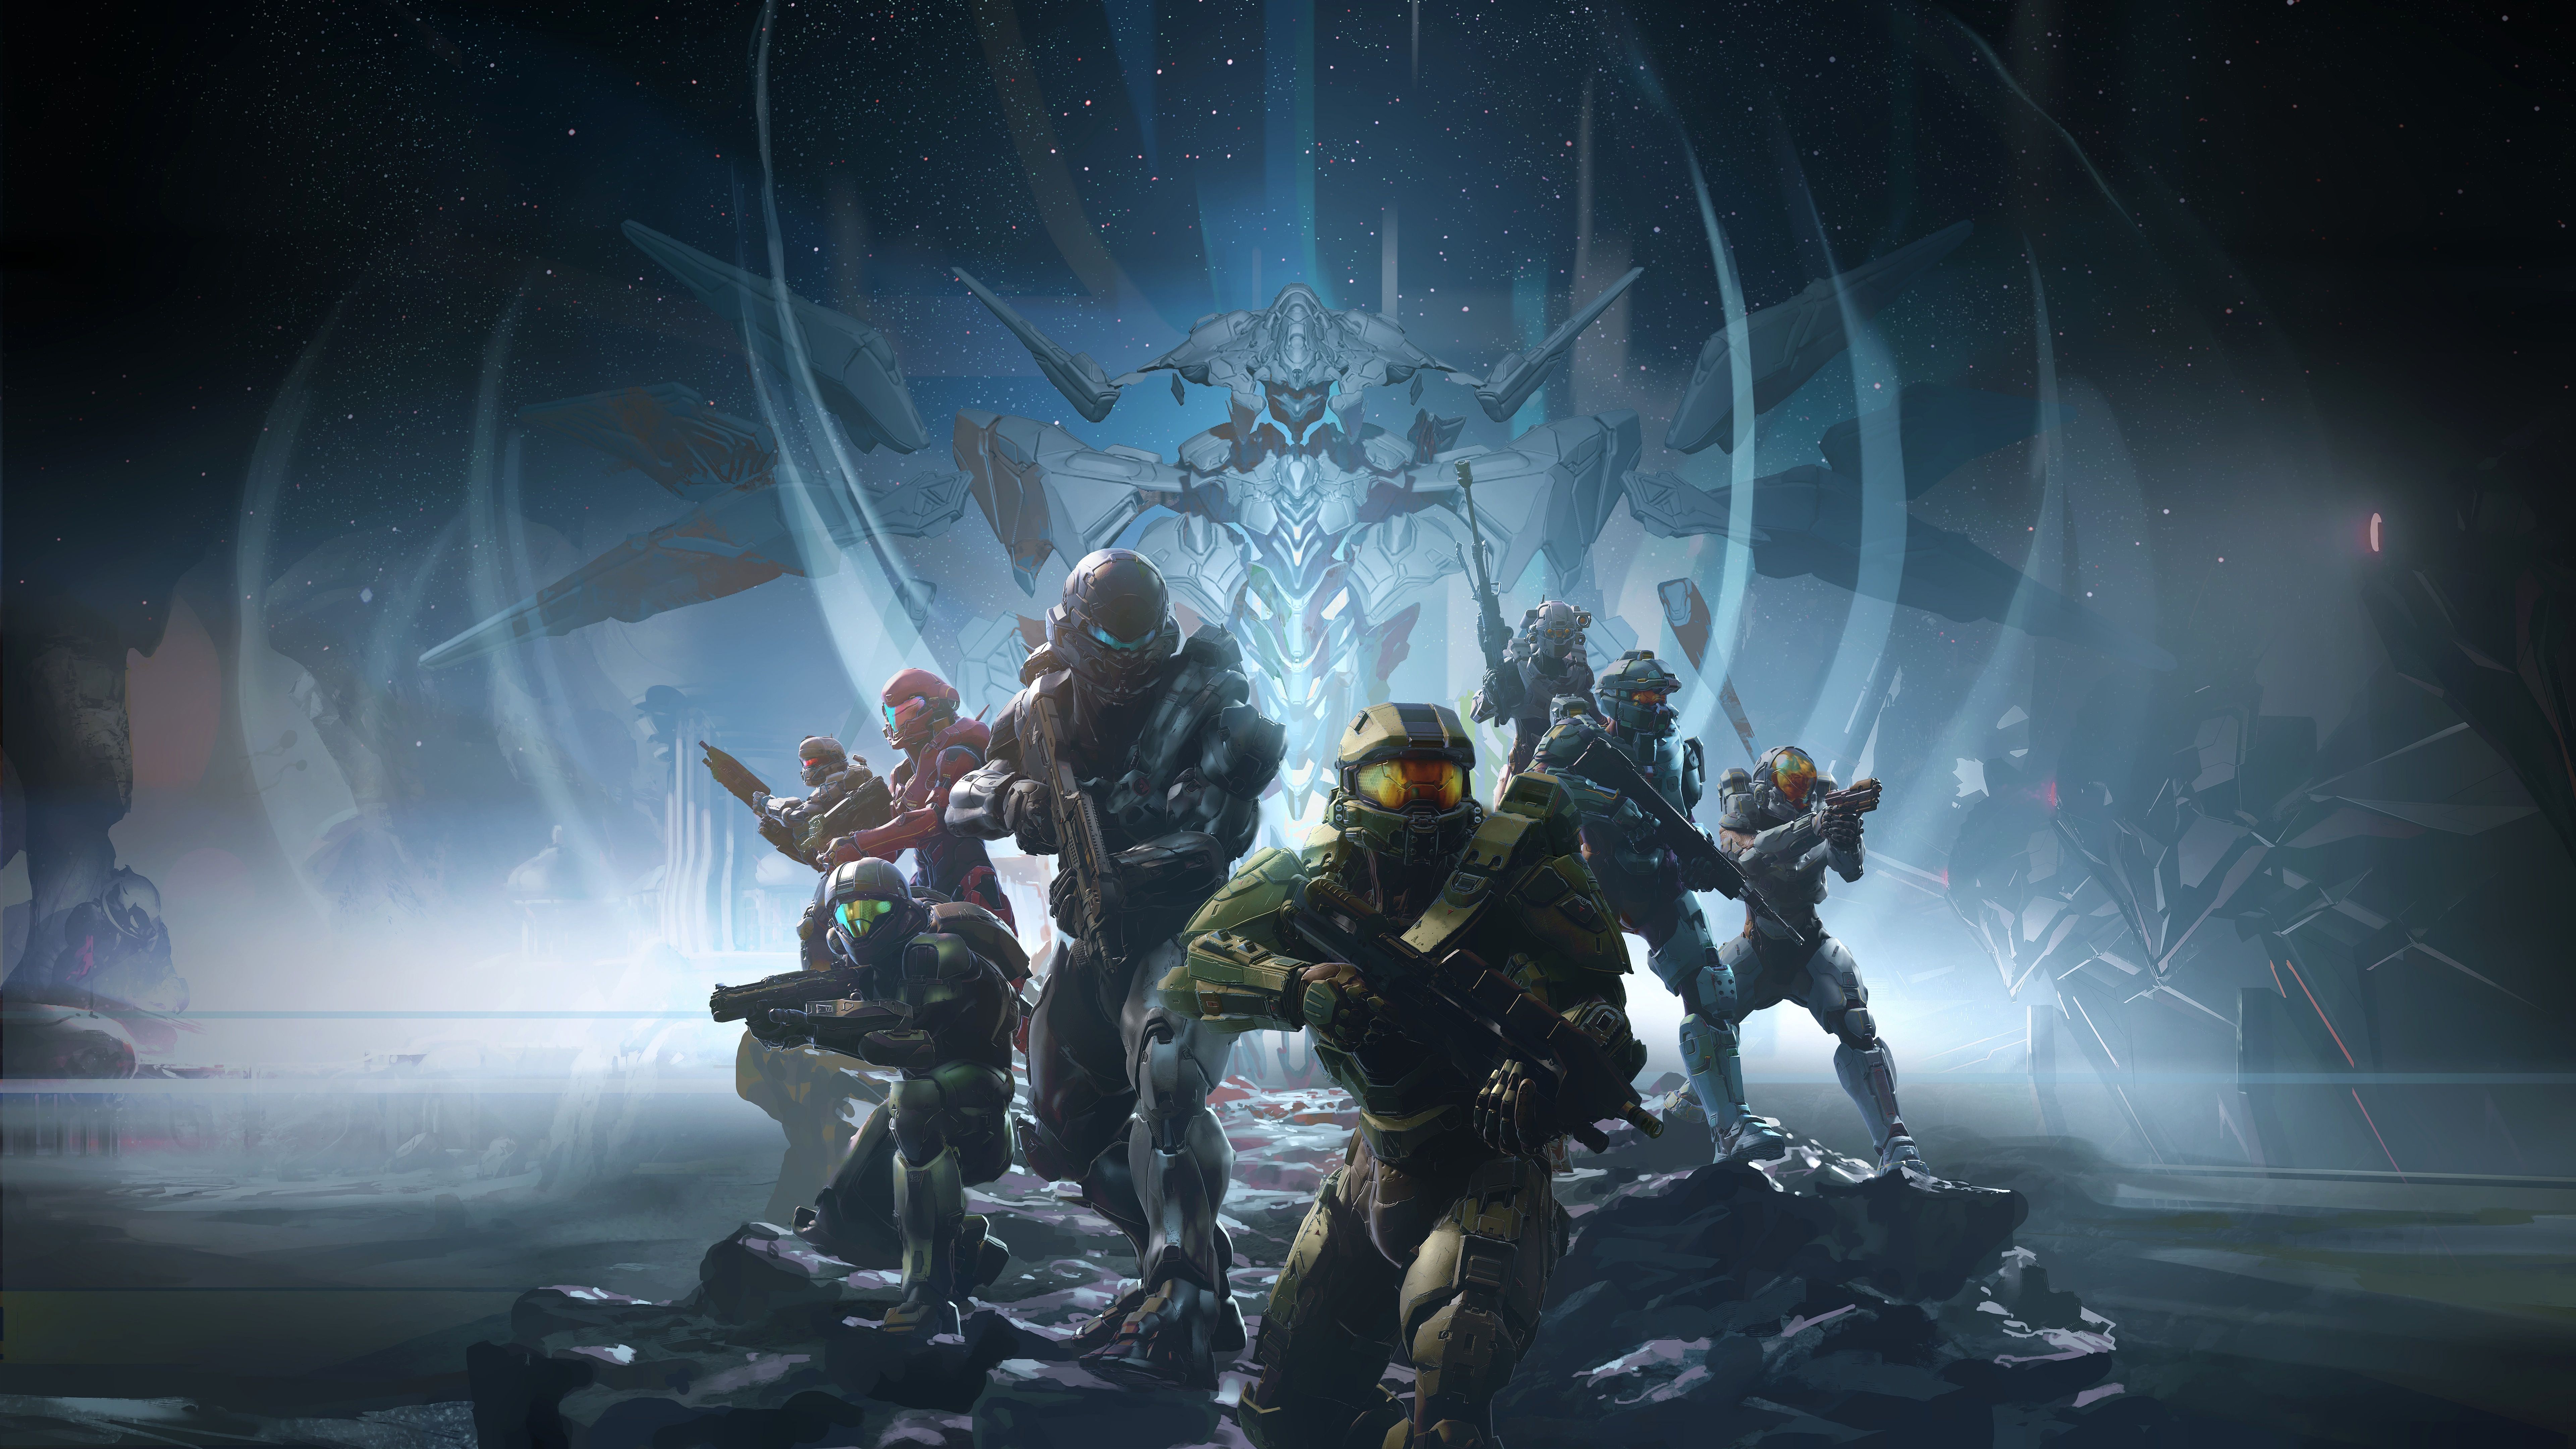 Free download Halo 5 Guardians Game Wallpaper HD Wallpaper [7680x4320] for your Desktop, Mobile & Tablet. Explore 7680 X 4320 Wallpaper x 1200 Wallpaper, 11520 x 2160 Wallpaper, 7680 x 1440 Wallpaper